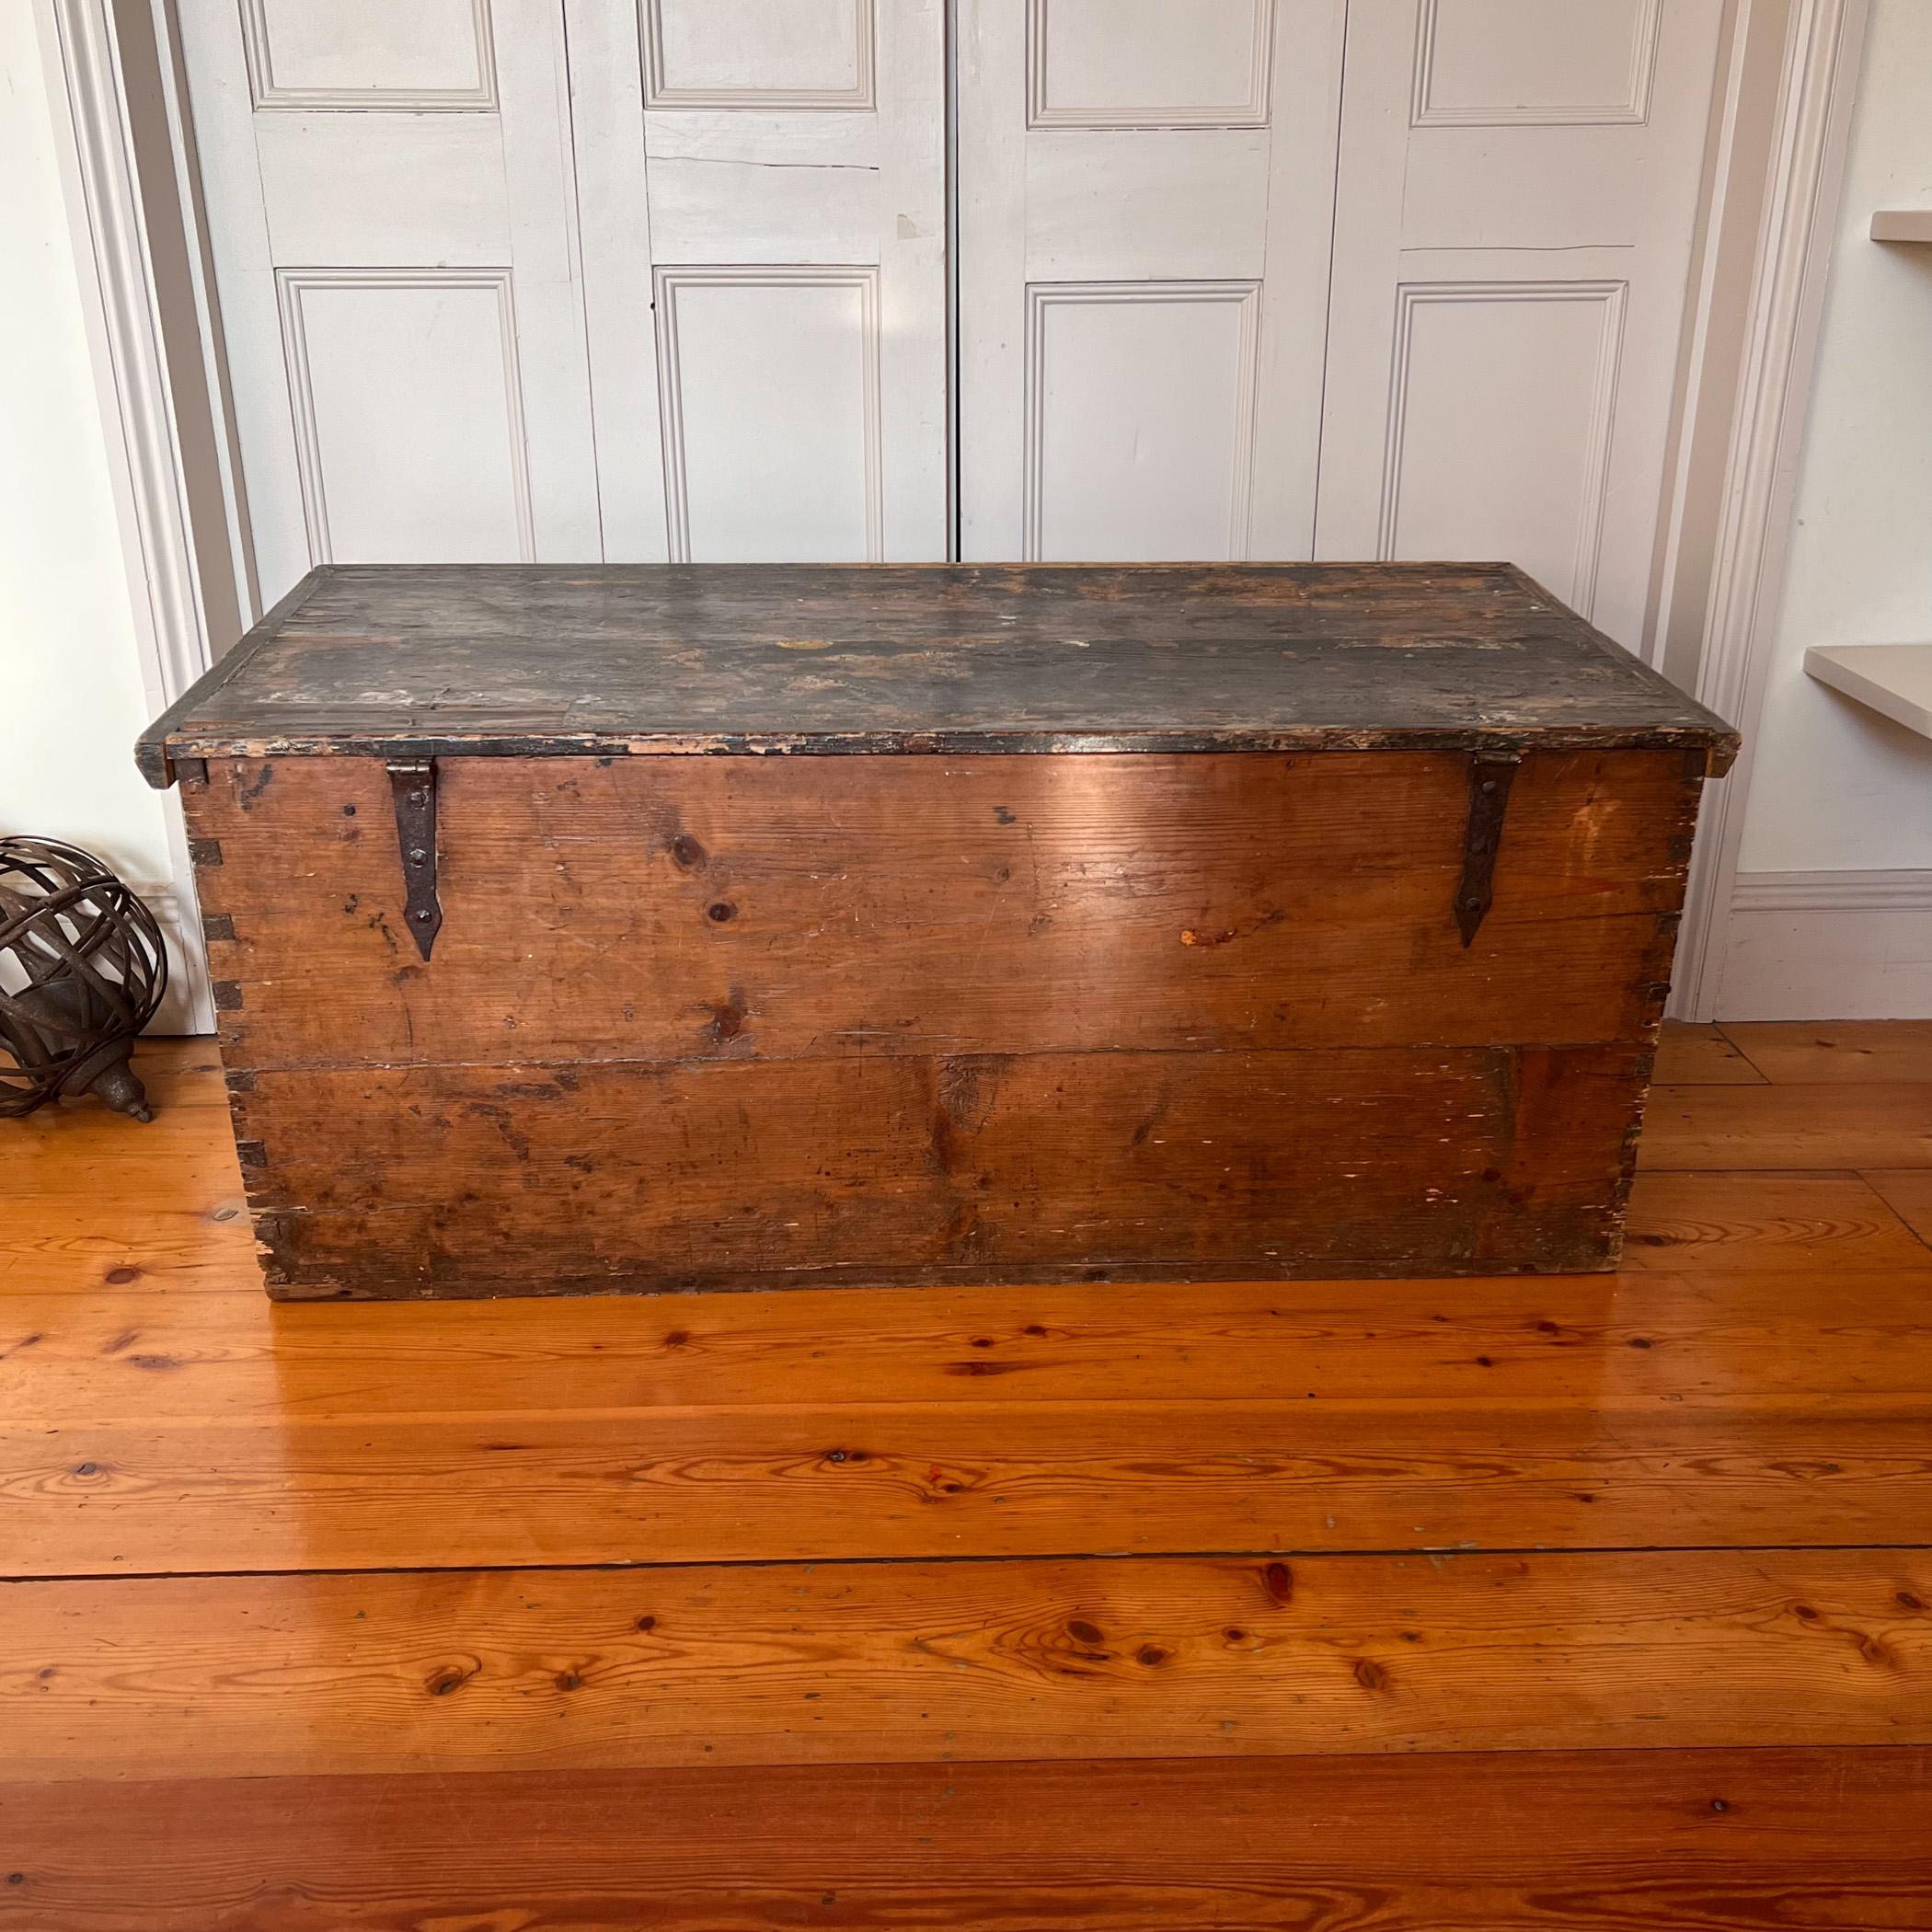 19th Century Late 19 C Hand Painted Large Wooden Chest / Trunk from Brittany, France